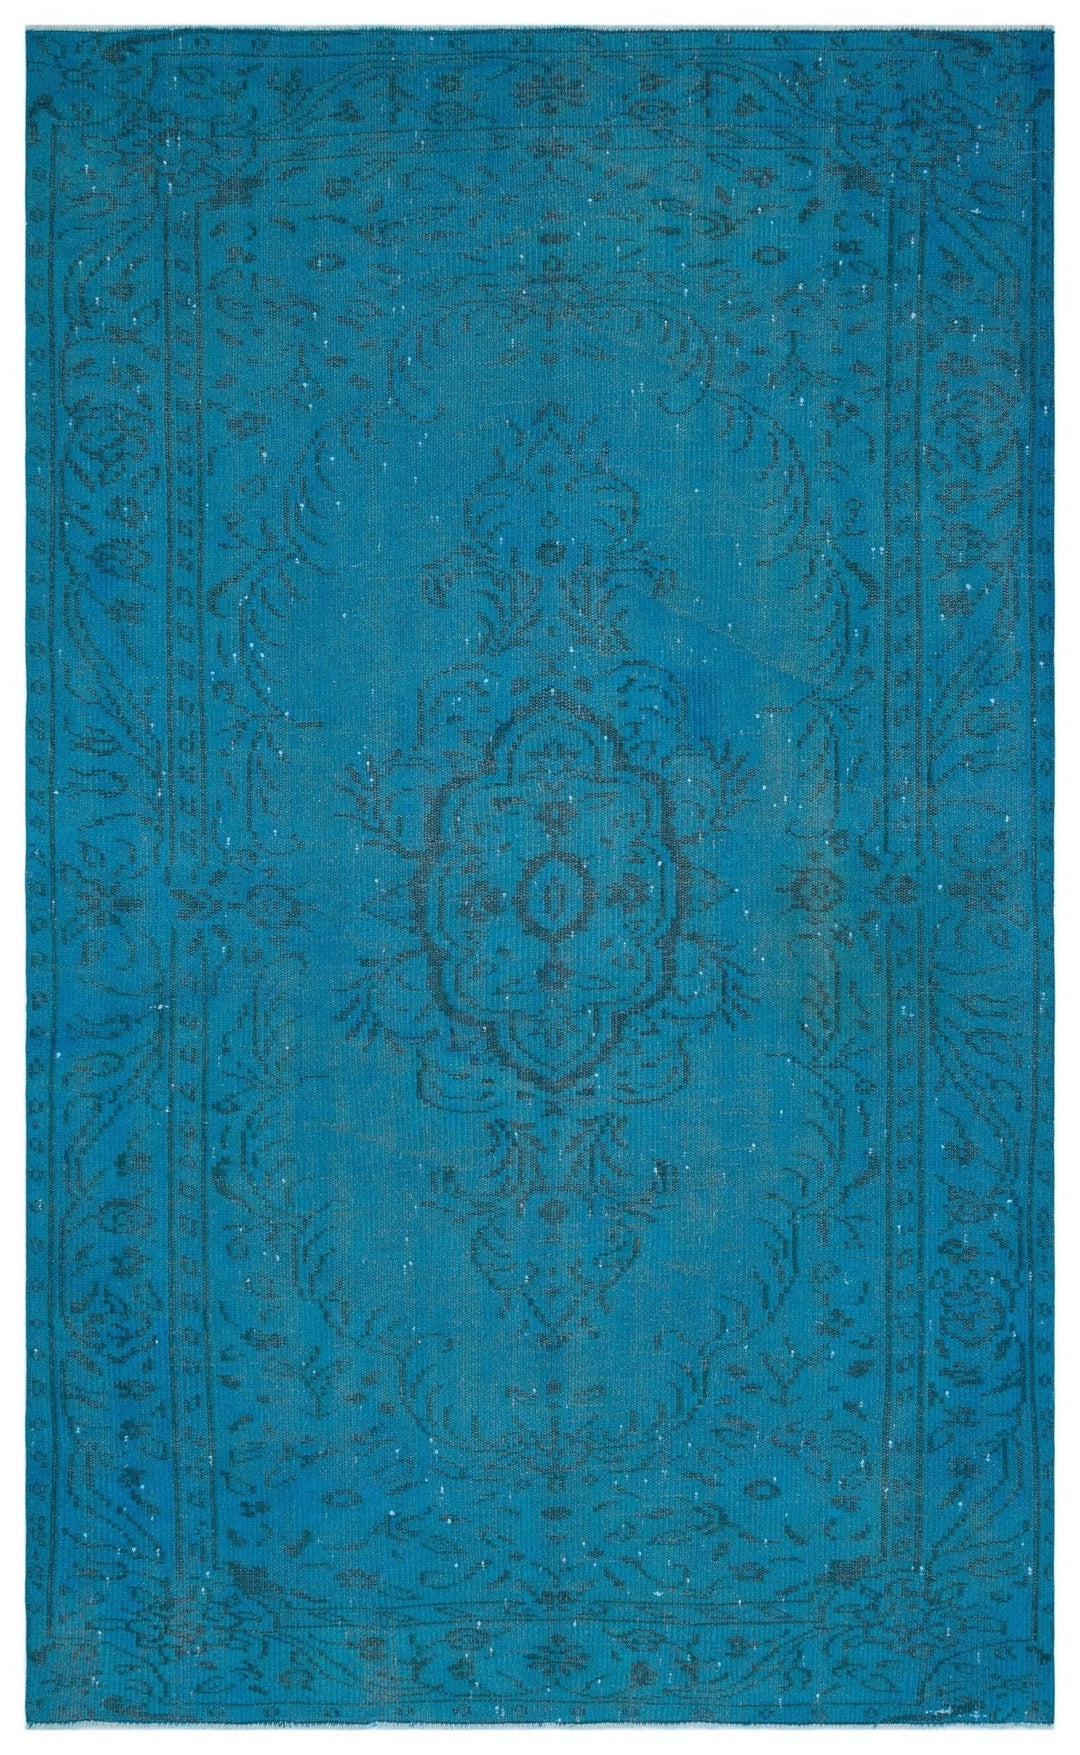 Athens 27999 Turquoise Tumbled Wool Hand Woven Carpet 168 x 272